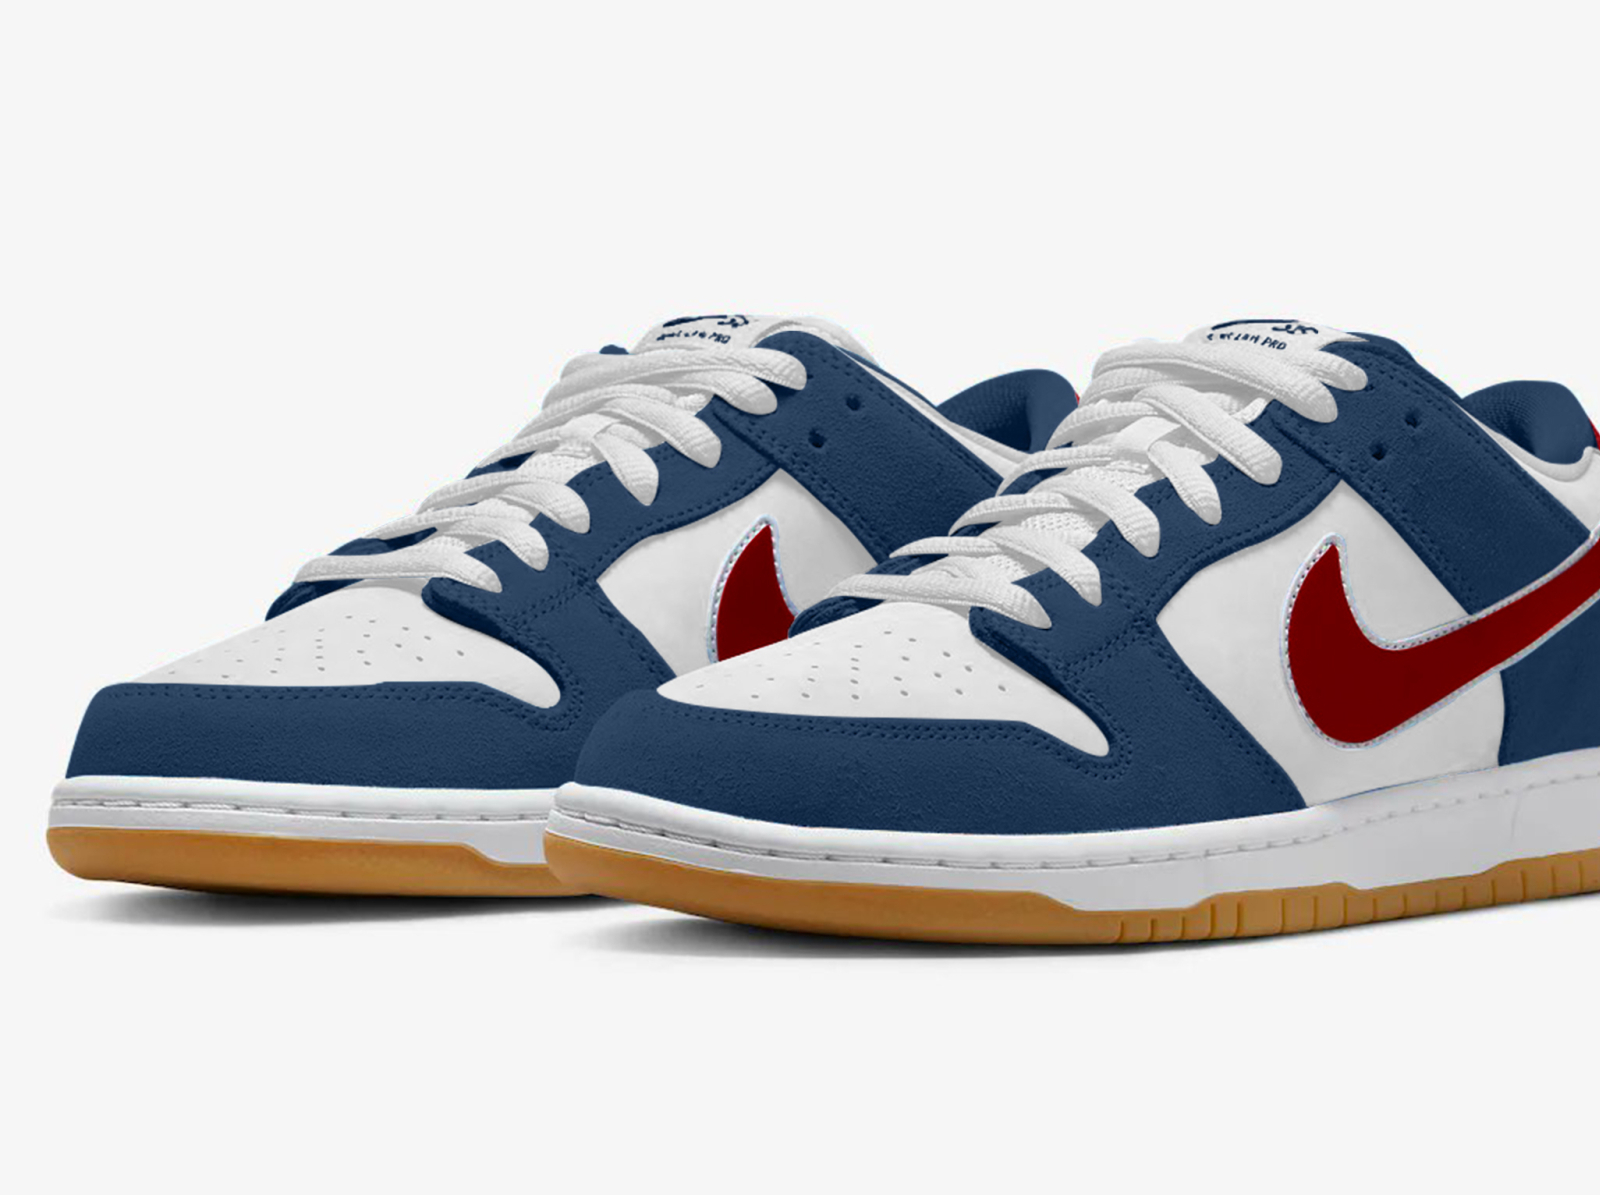 Nike SB Dunk Boston Red Sox by Michael Butler on Dribbble